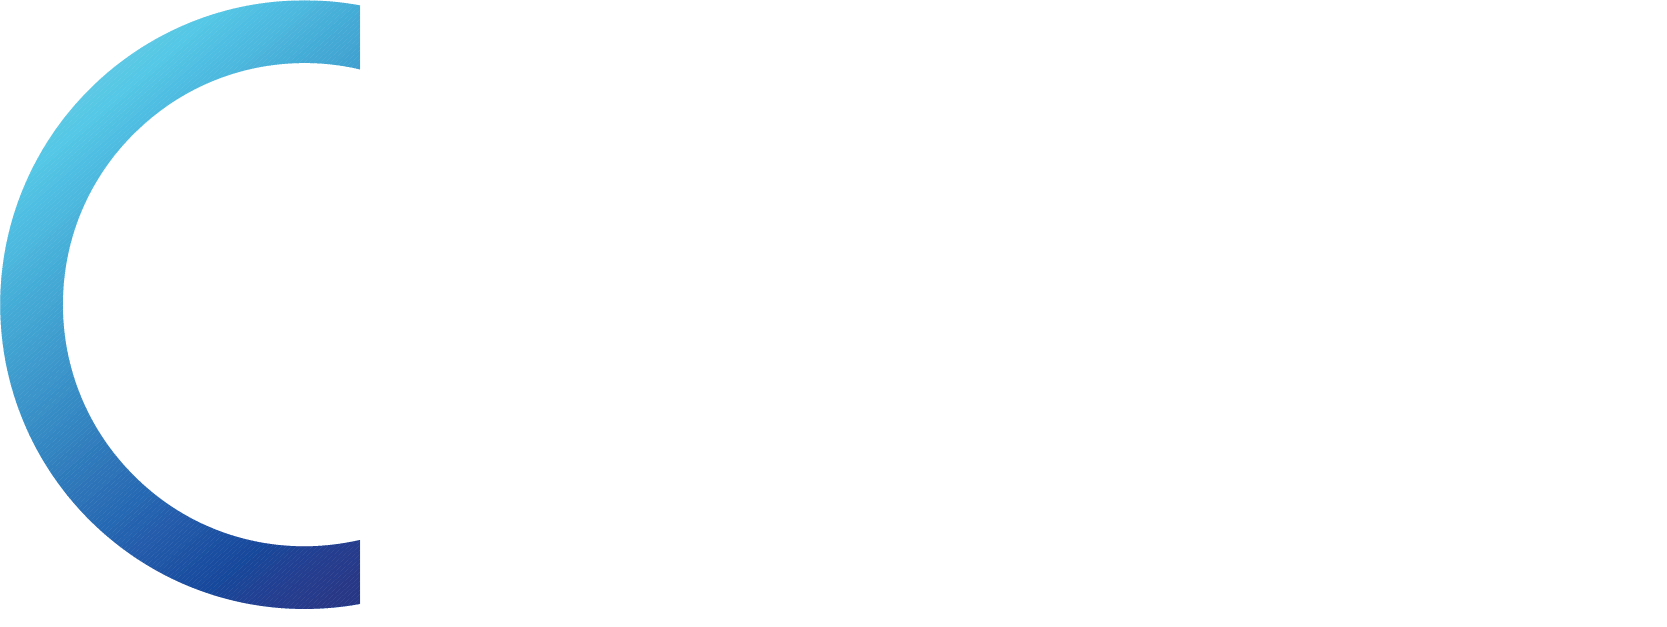 Chum Wellness - Psychotherapy & Counselling Service in Bangladesh